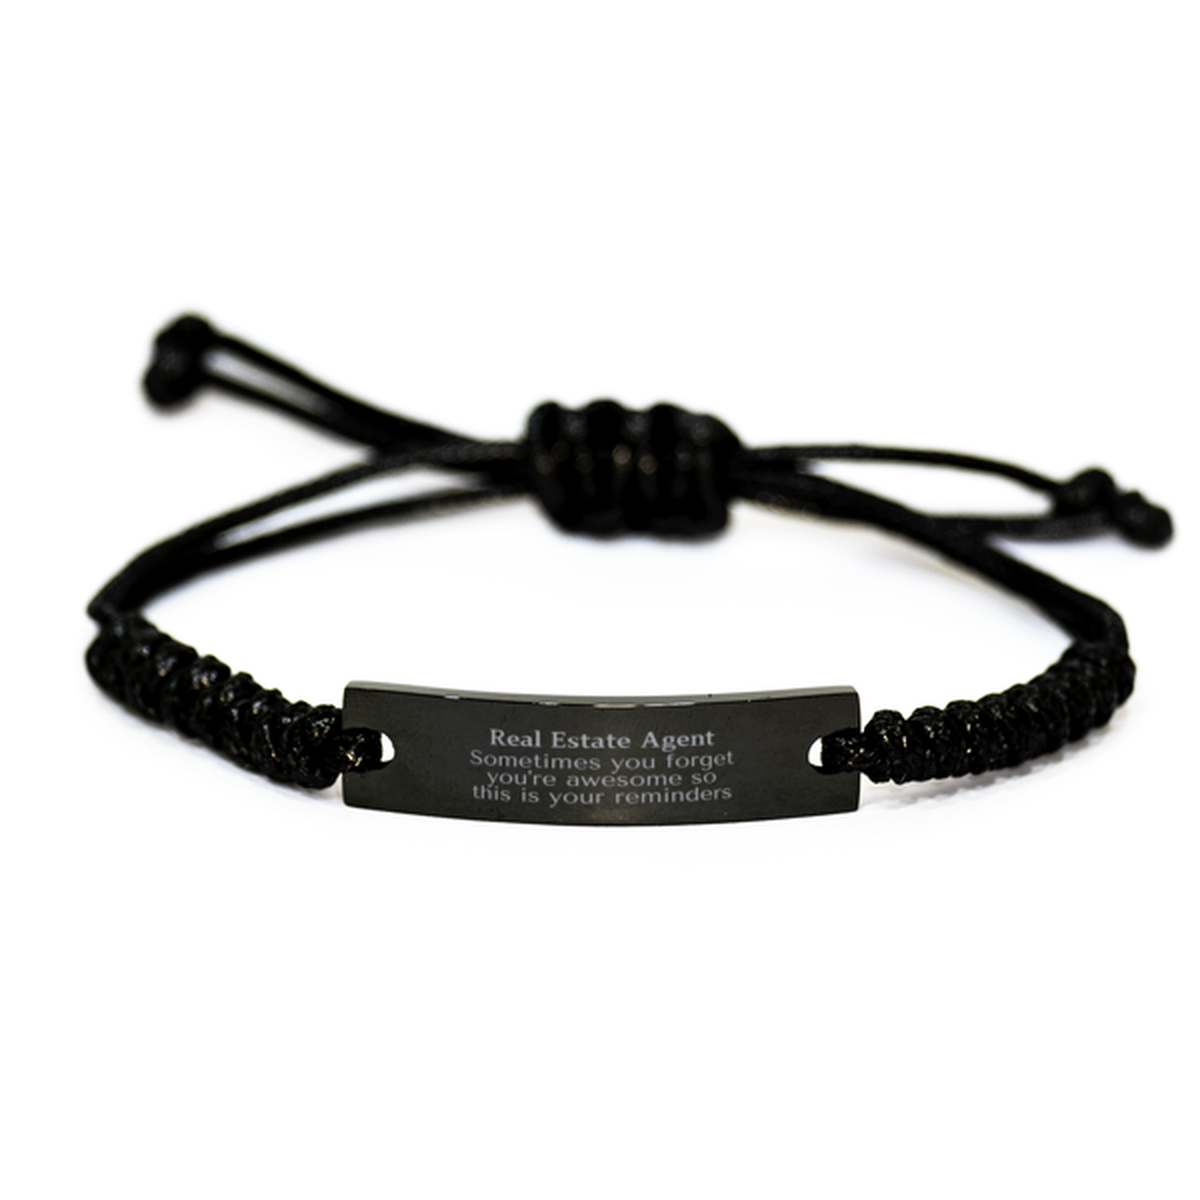 Sentimental Real Estate Agent Black Rope Bracelet, Real Estate Agent Sometimes you forget you're awesome so this is your reminders, Graduation Christmas Birthday Gifts for Real Estate Agent, Men, Women, Coworkers